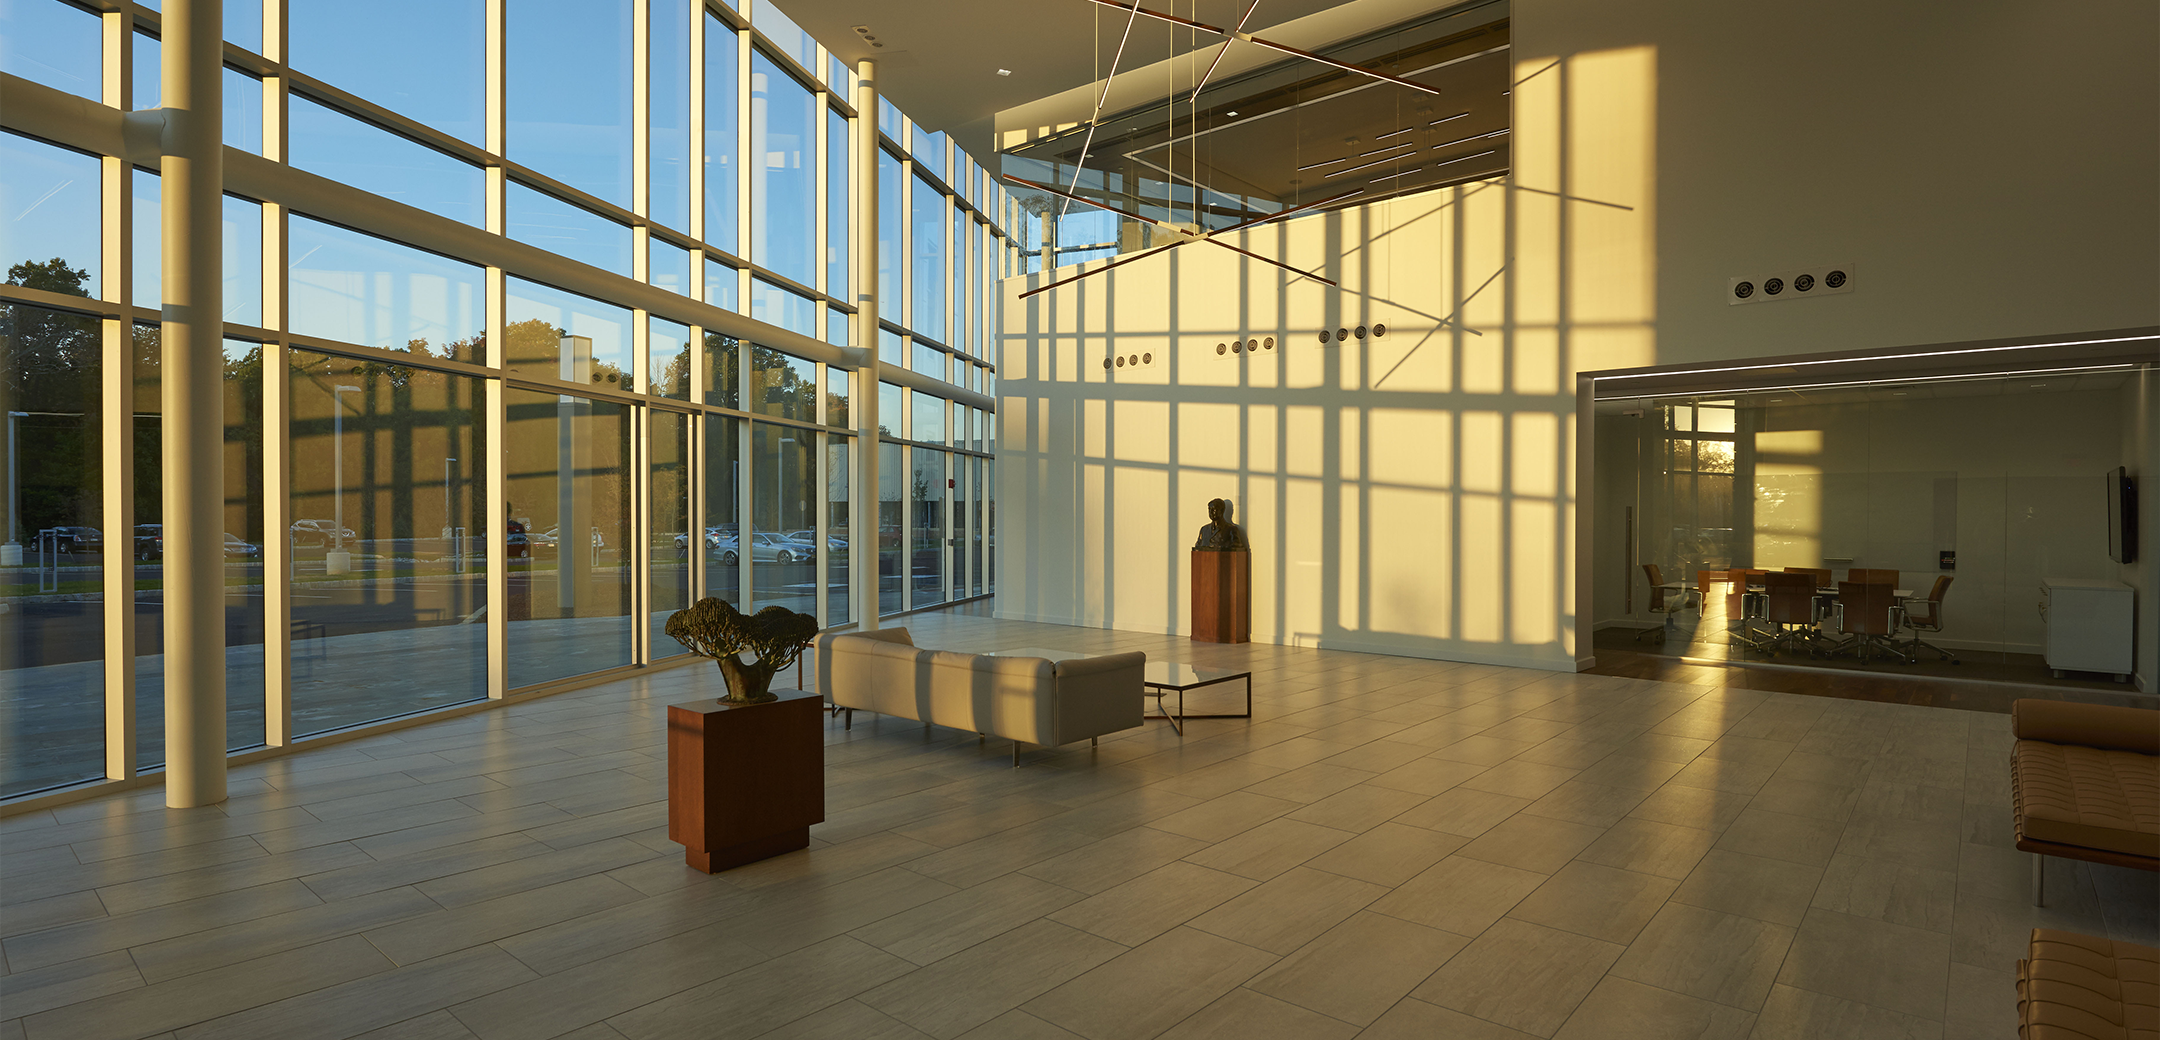 The interior lobby of Sunoco headquarters featuring large windows and open concept lobby with a view to the front of the building.